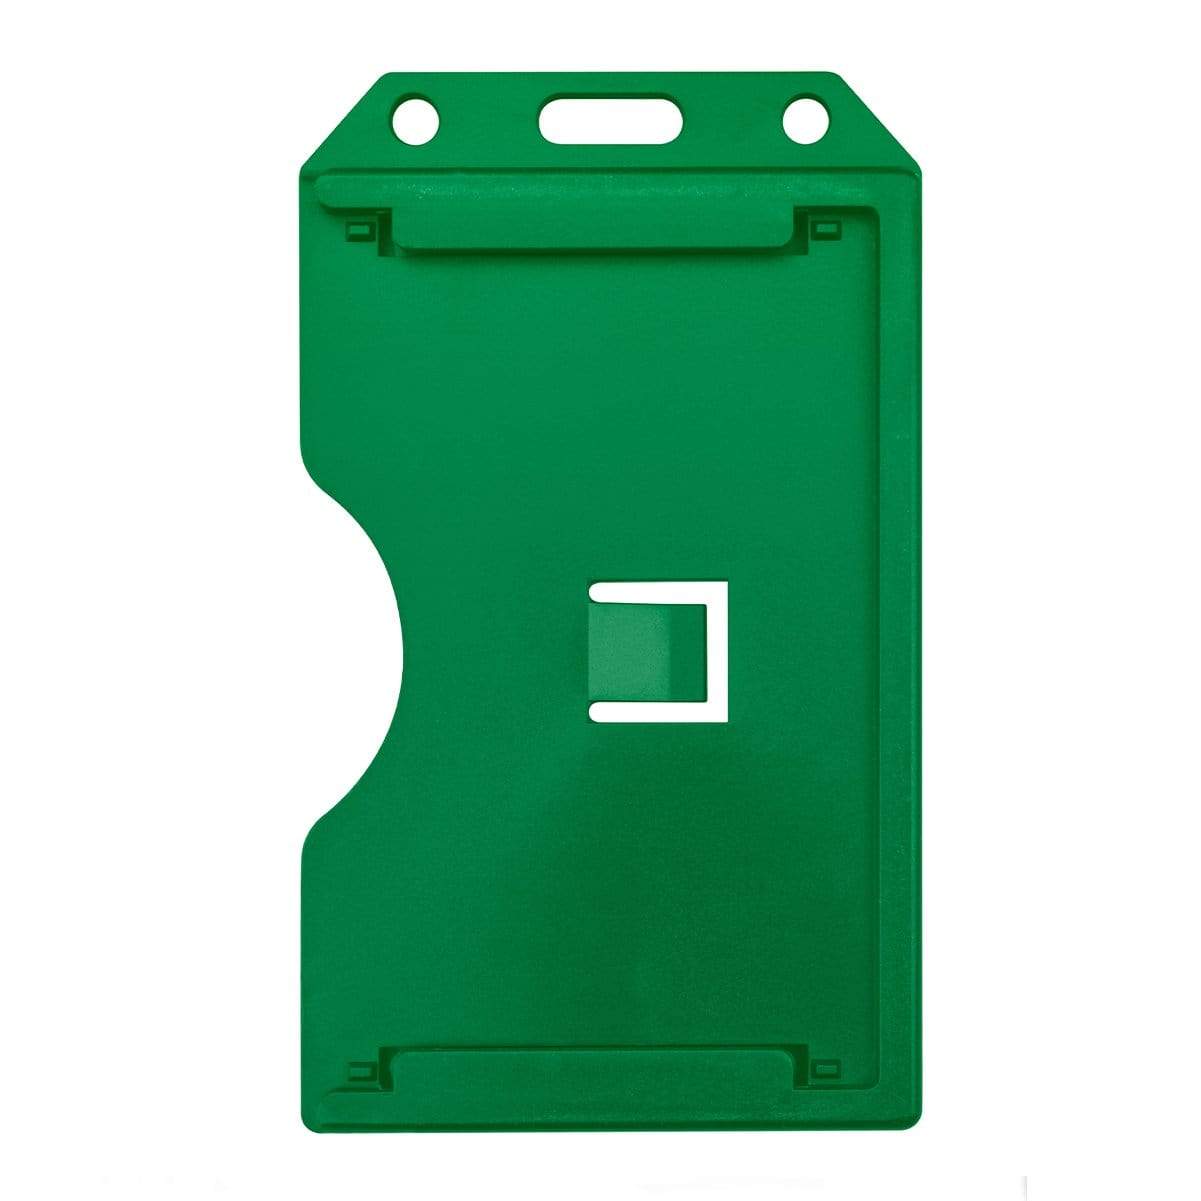 A green, rigid plastic ID card holder features a rectangular cutout on the front and a slot for attaching a lanyard near the top edge. Ideal as a 2 Sided Rigid Vertical MultiCard Badge Holder - Hard Plastic Multiple ID Card Holder (1840-308X).